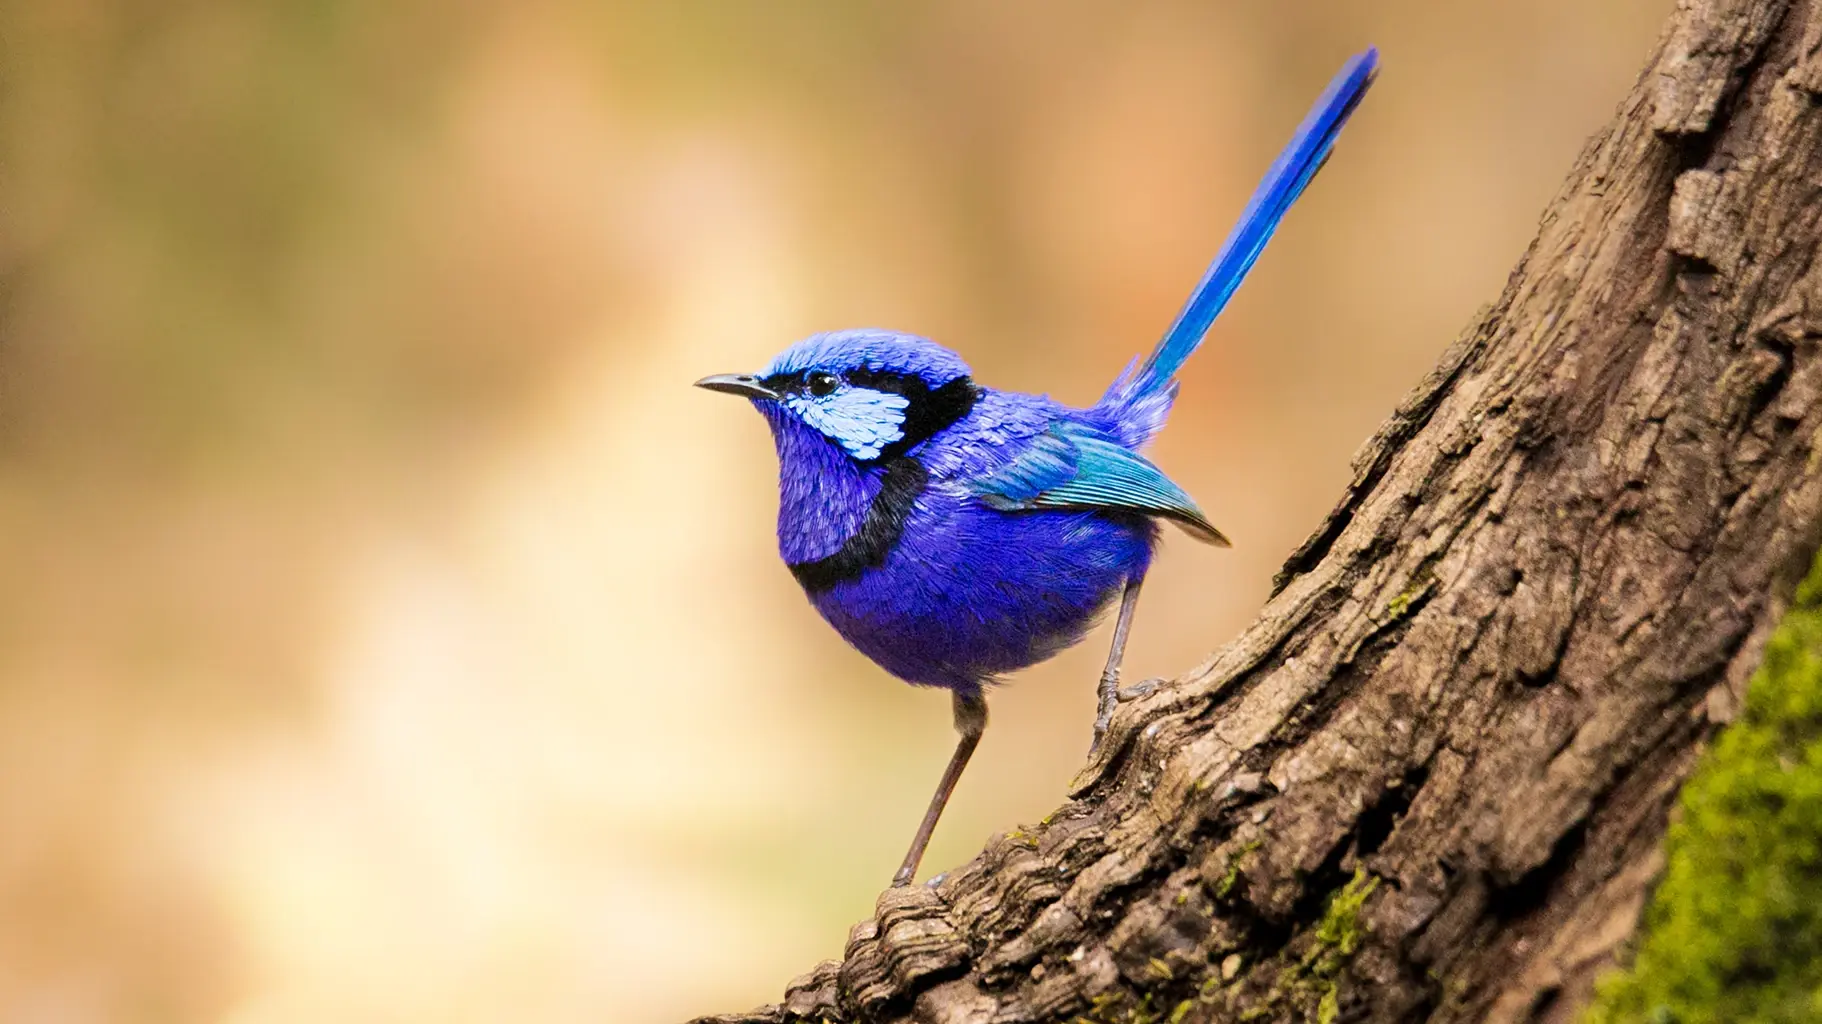 There are almost 400 bird species that can only be found in Australia! Species only found in one place – on an island, in a country, or specific region – are called endemic species. The splendid fairywren, pictured above, is endemic to Australia. The Gould League’s mission was to protect Australia’s birds and teach others to do the same. It did this by teaching its members about the value of birds and nature. A key goal of the League’s work was to stop egg collecting! 